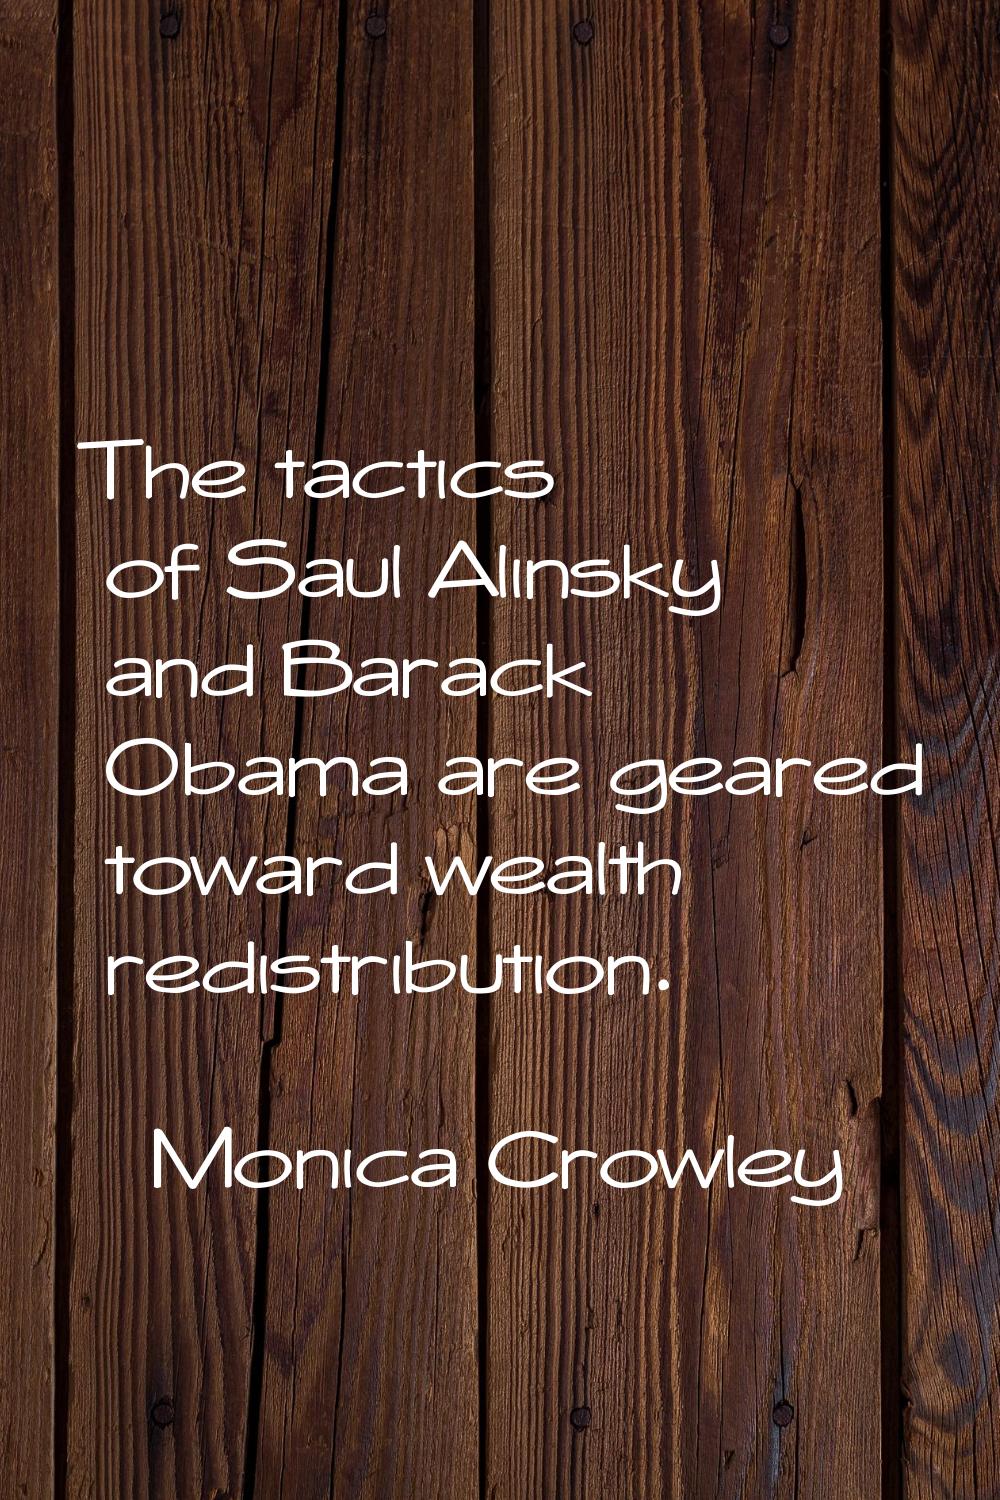 The tactics of Saul Alinsky and Barack Obama are geared toward wealth redistribution.